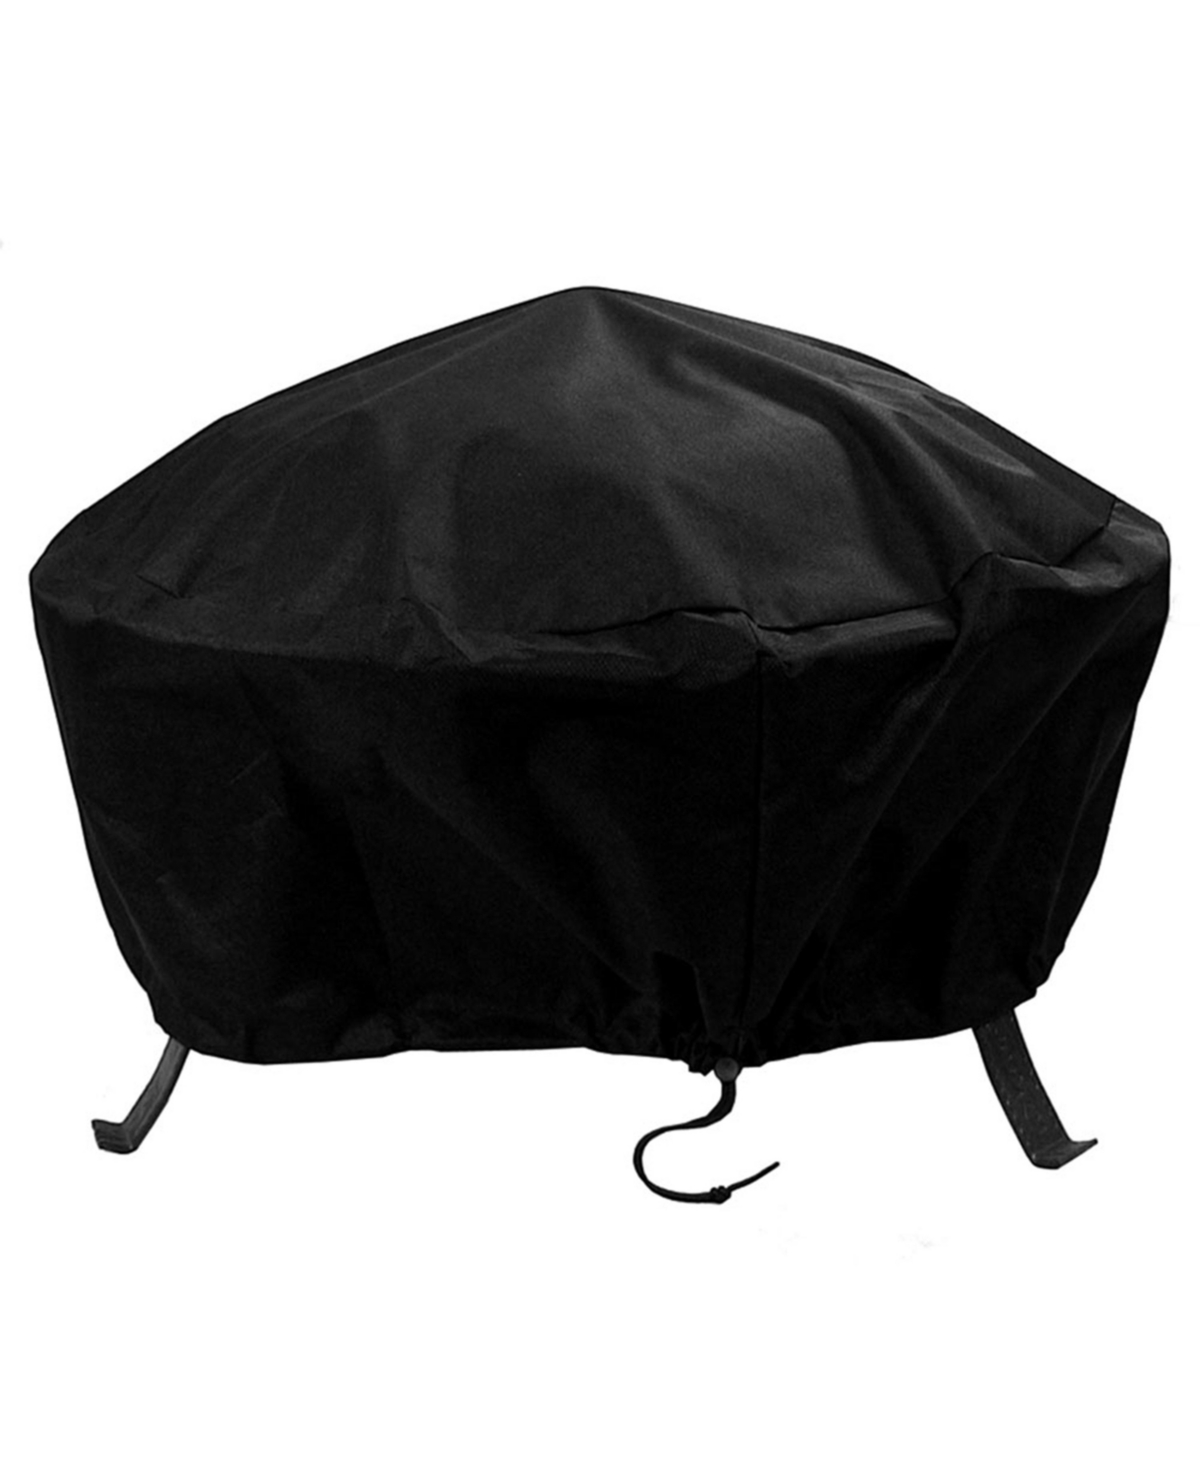 30 in Weather-Resistant Pvc Round Fire Pit Cover - Black - Black